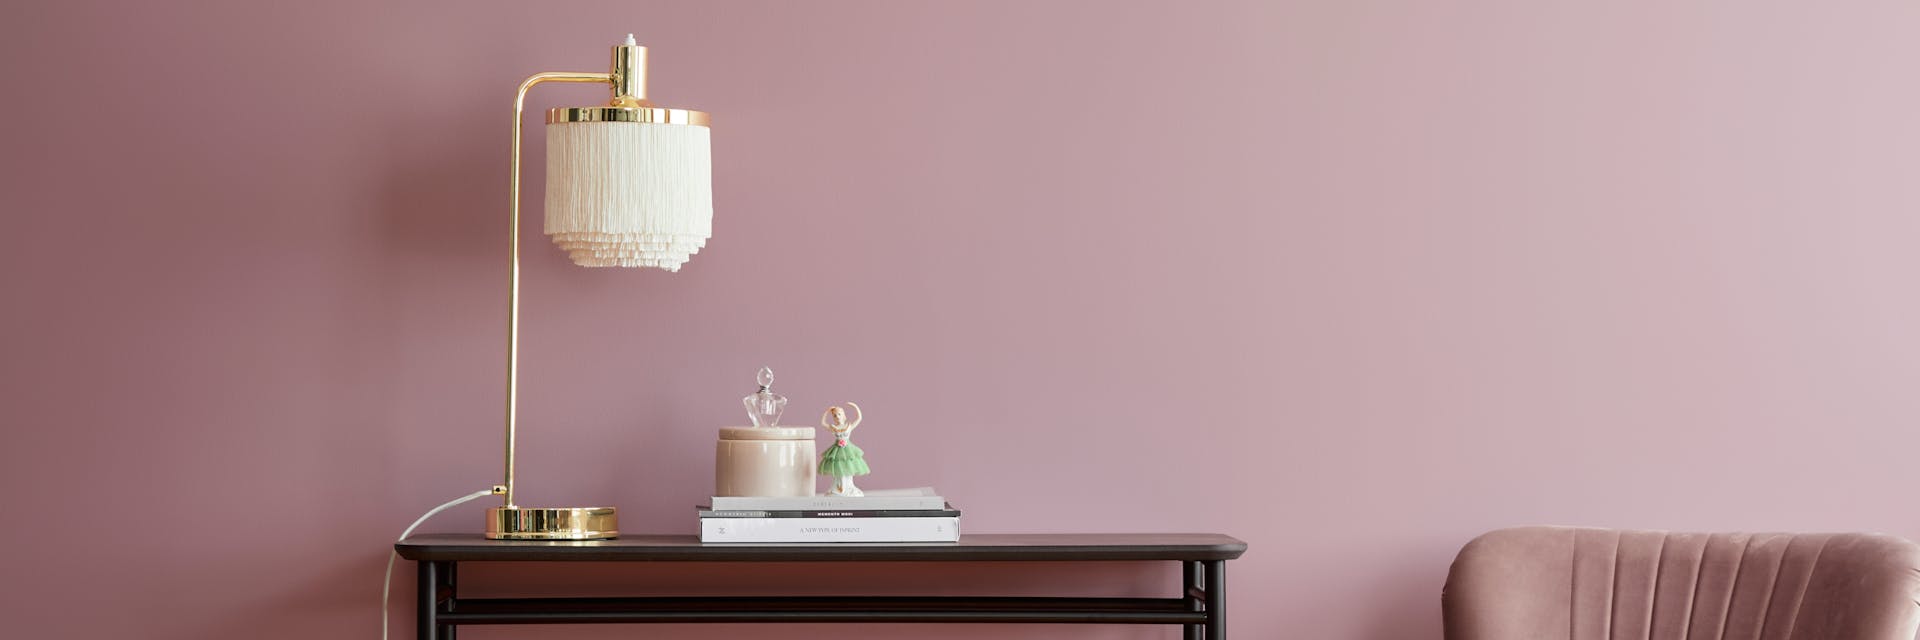 Pink wall paint makes any room look fresh and uncomplicated.